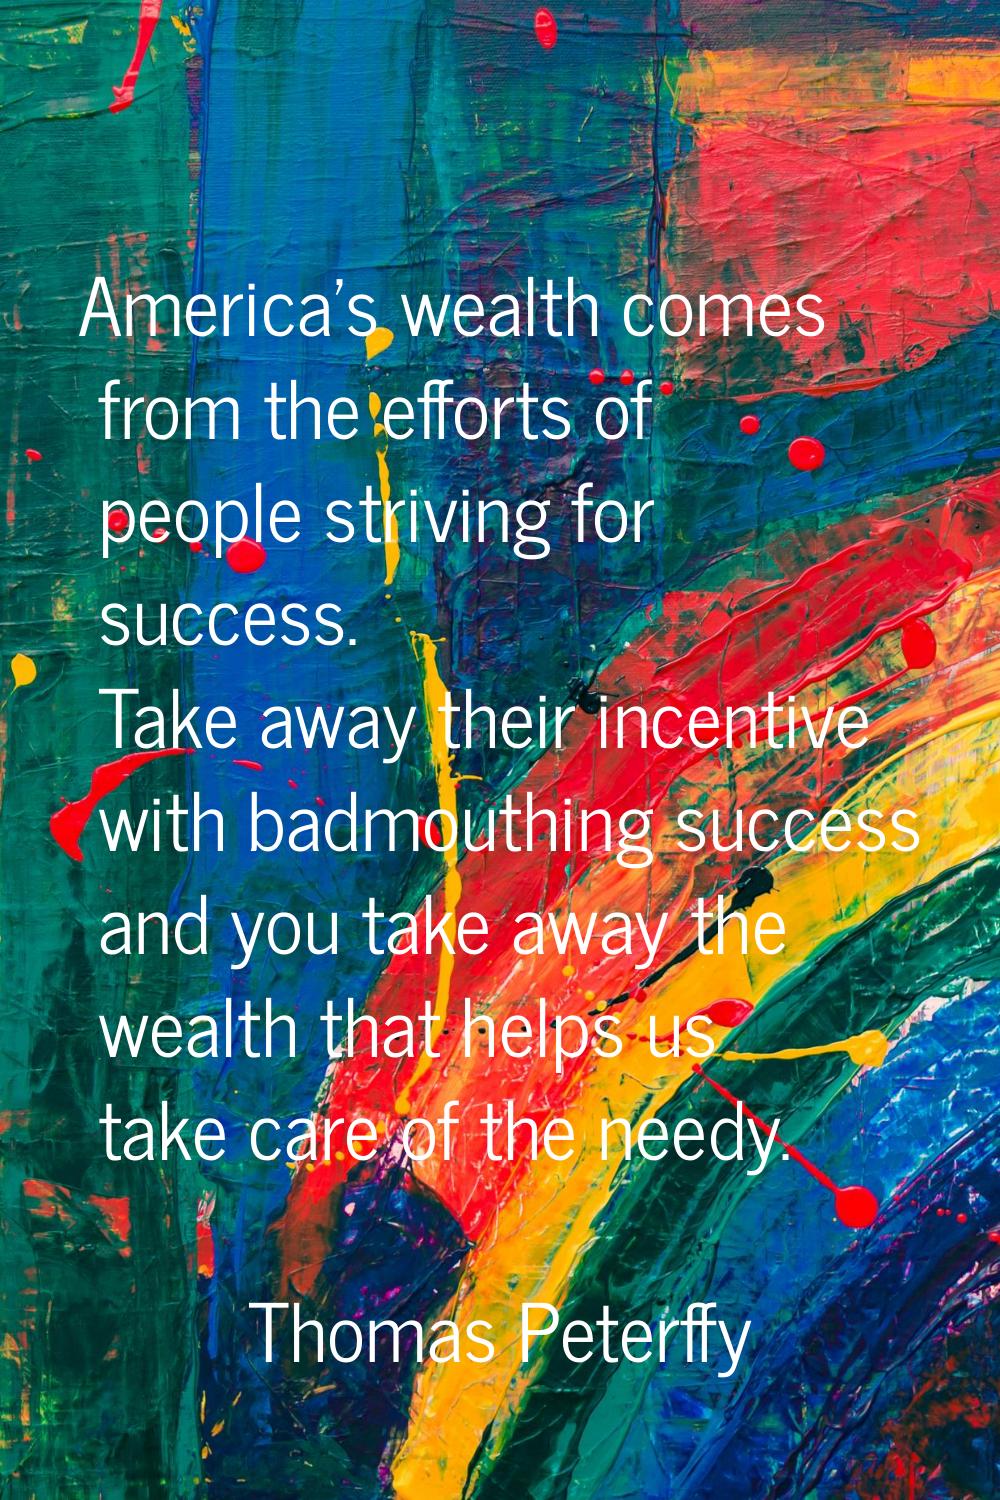 America's wealth comes from the efforts of people striving for success. Take away their incentive w